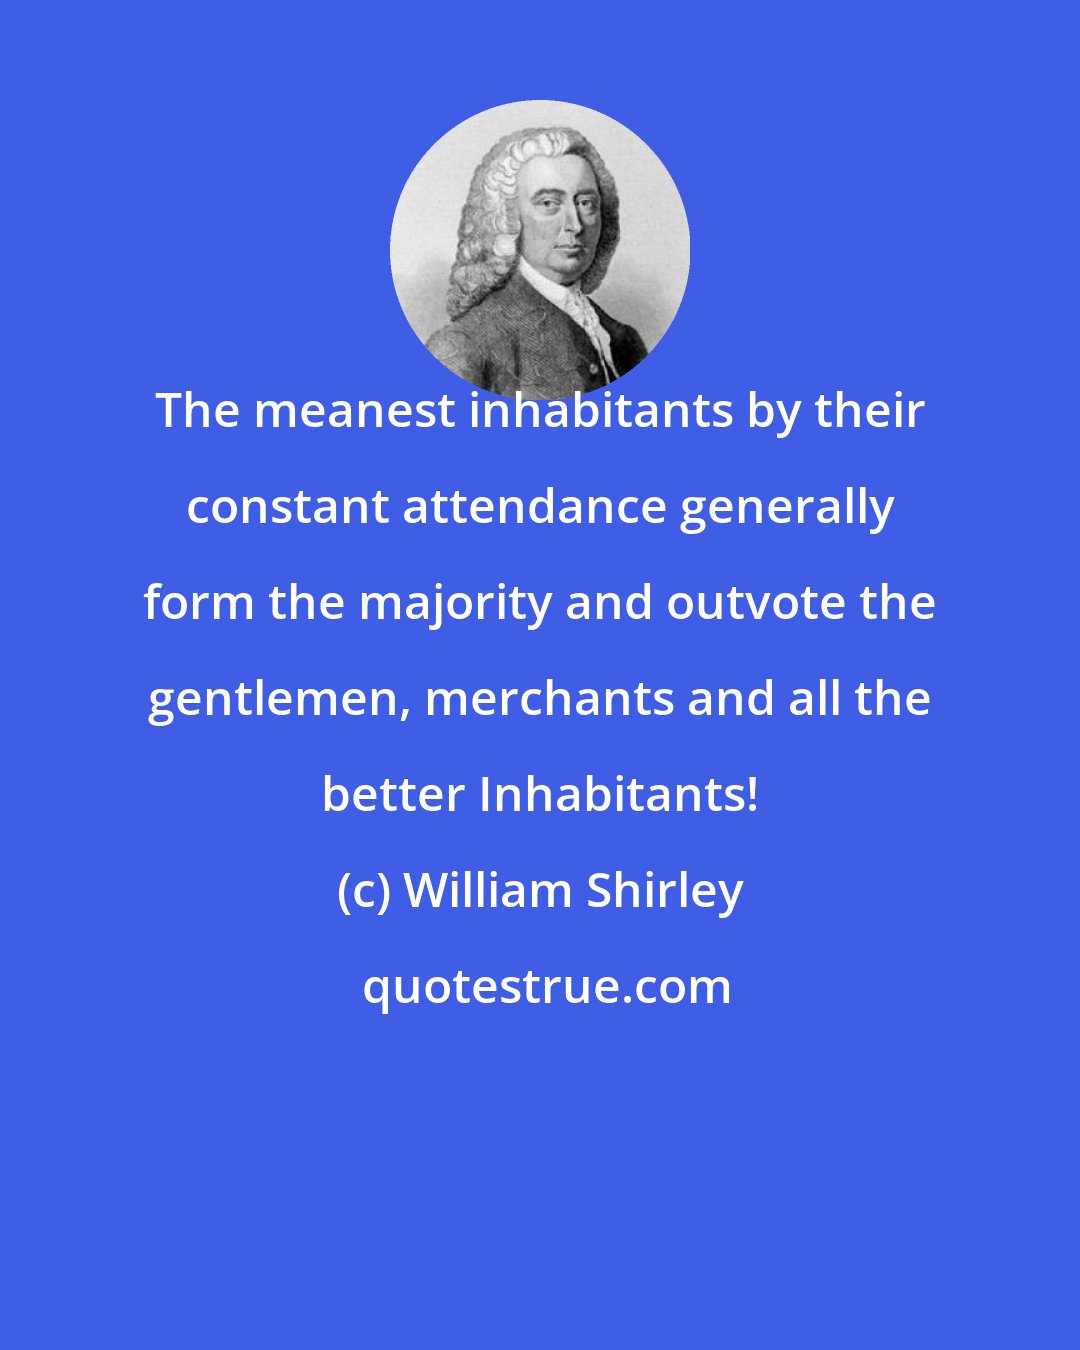 William Shirley: The meanest inhabitants by their constant attendance generally form the majority and outvote the gentlemen, merchants and all the better Inhabitants!